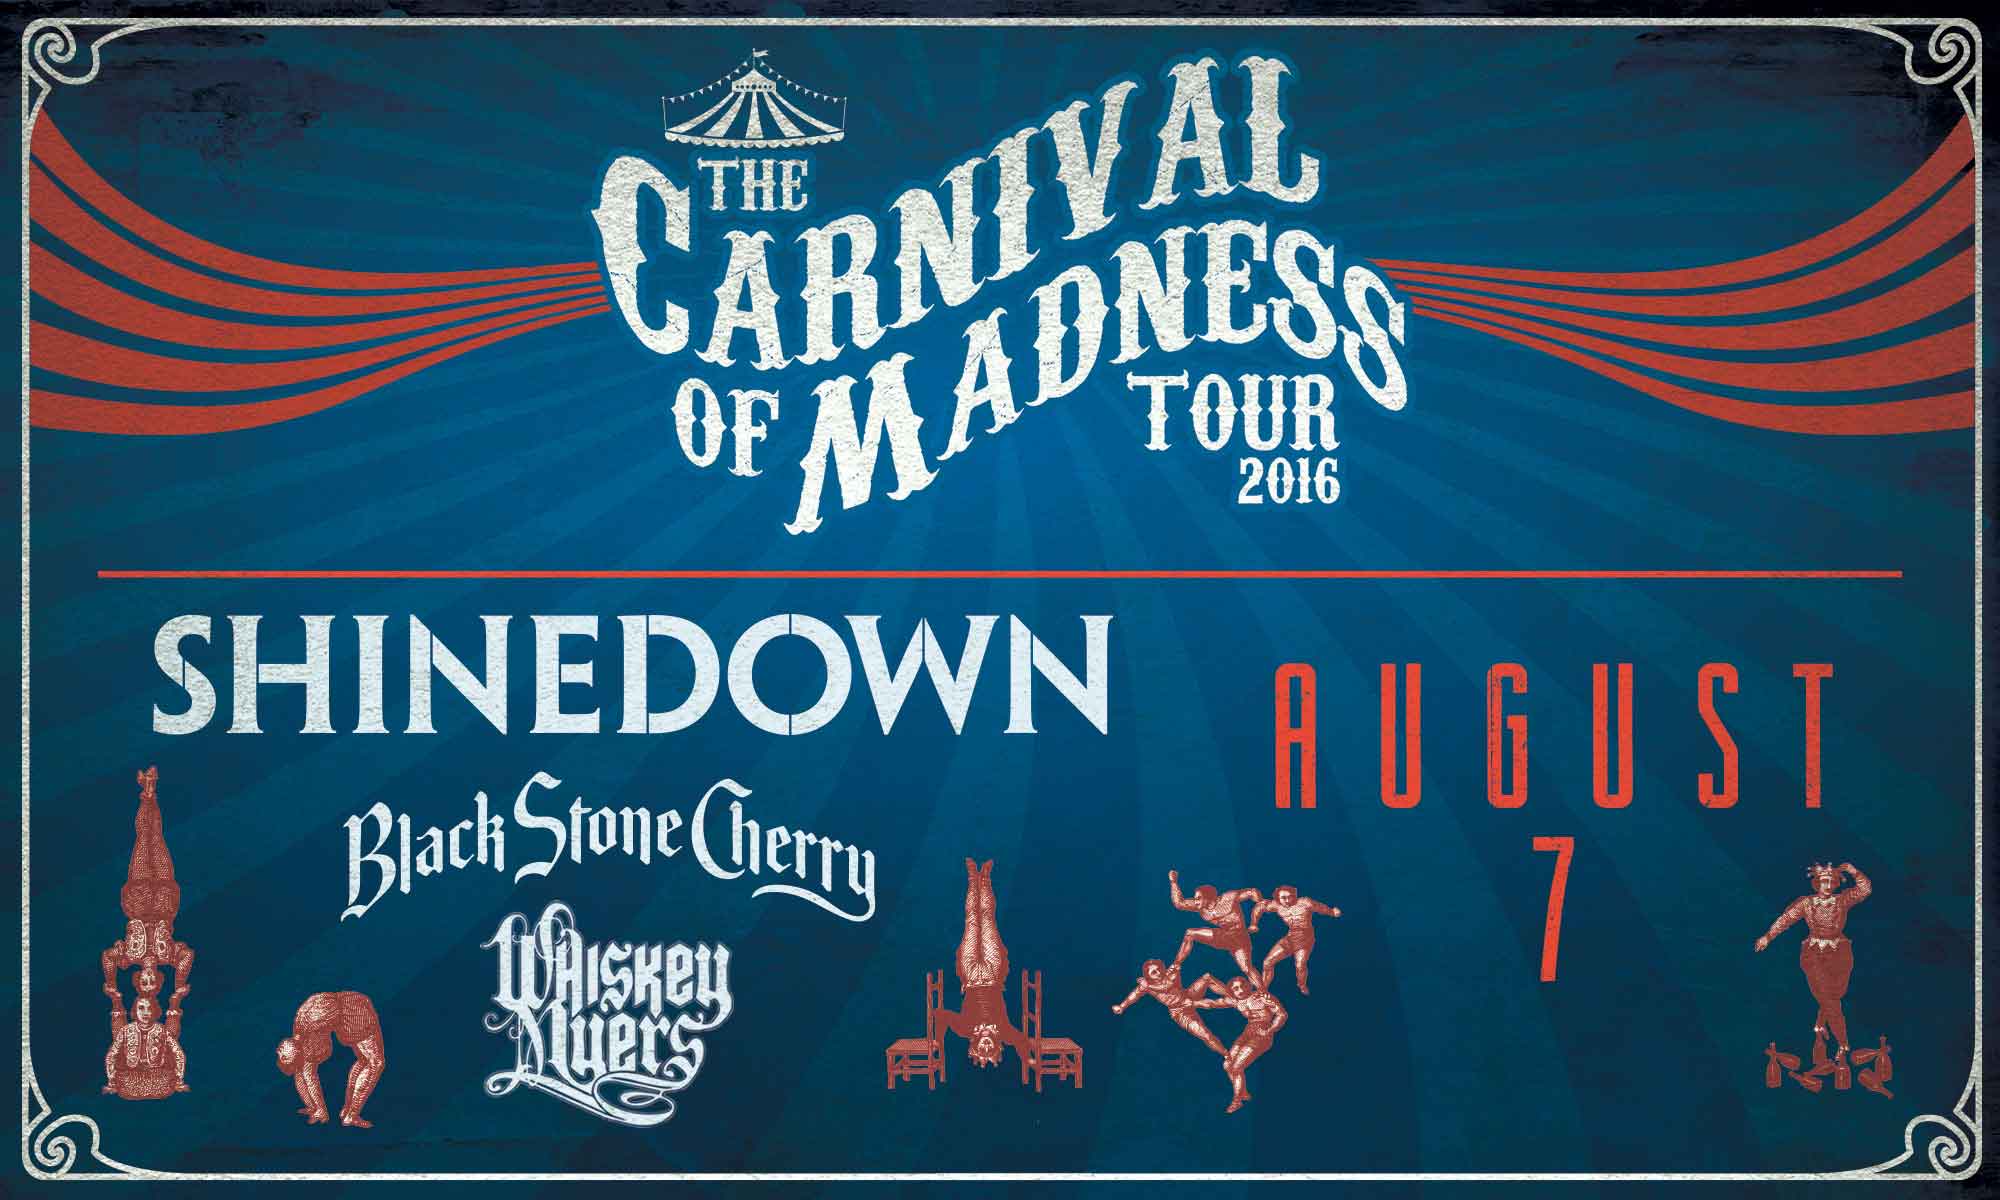 Carnival of Madness Tour featuring Shinedown at Coney Island Amphitheater on 08-07-16